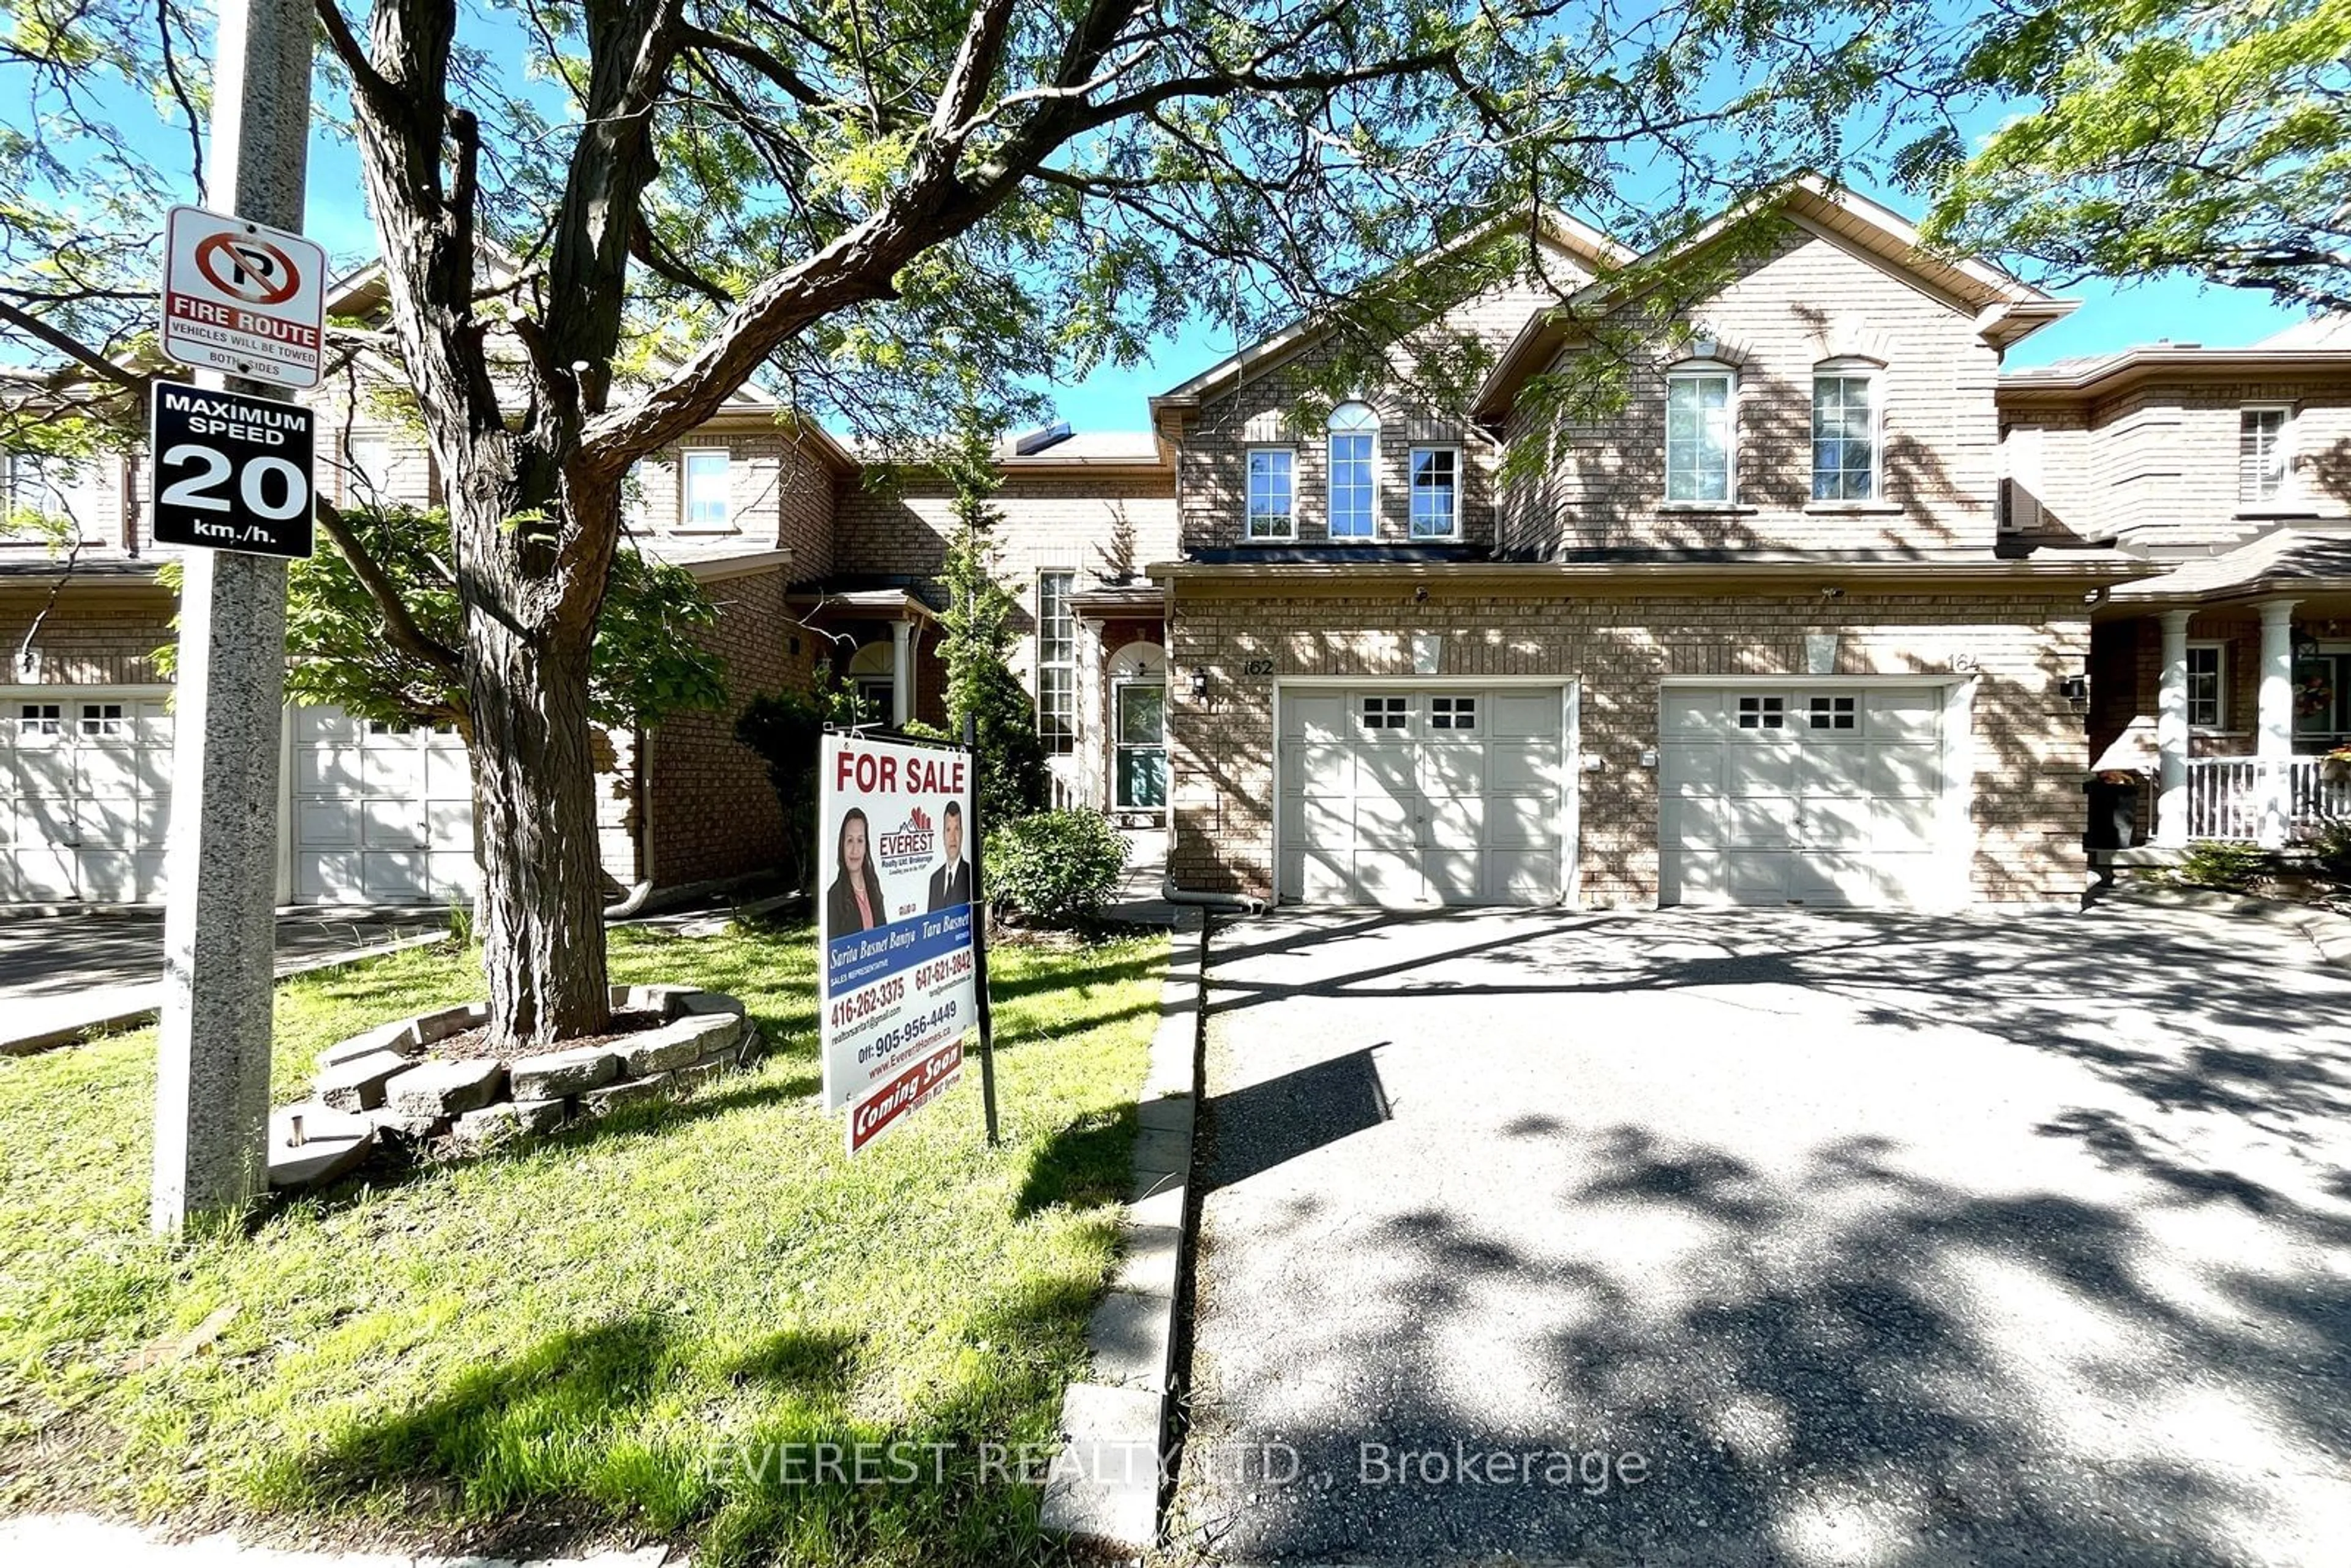 A pic from exterior of the house or condo for 9800 Mclaughlin Rd #162, Brampton Ontario L6X 4R1